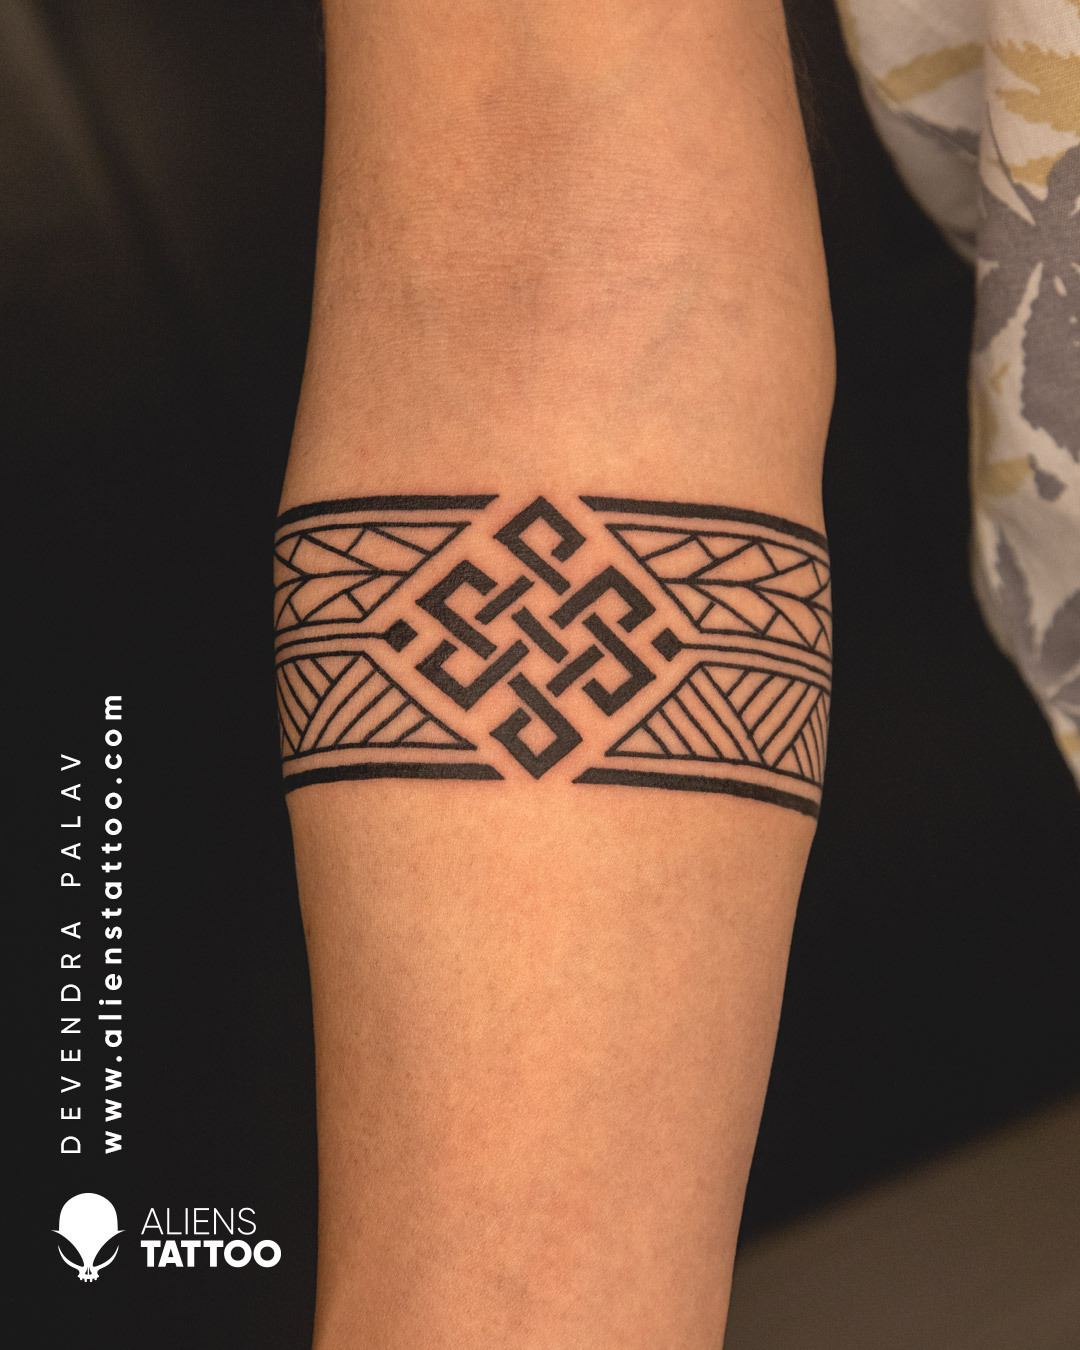 Aliens Tattoo — Checkout this amazing Armband tattoo by Devendra...